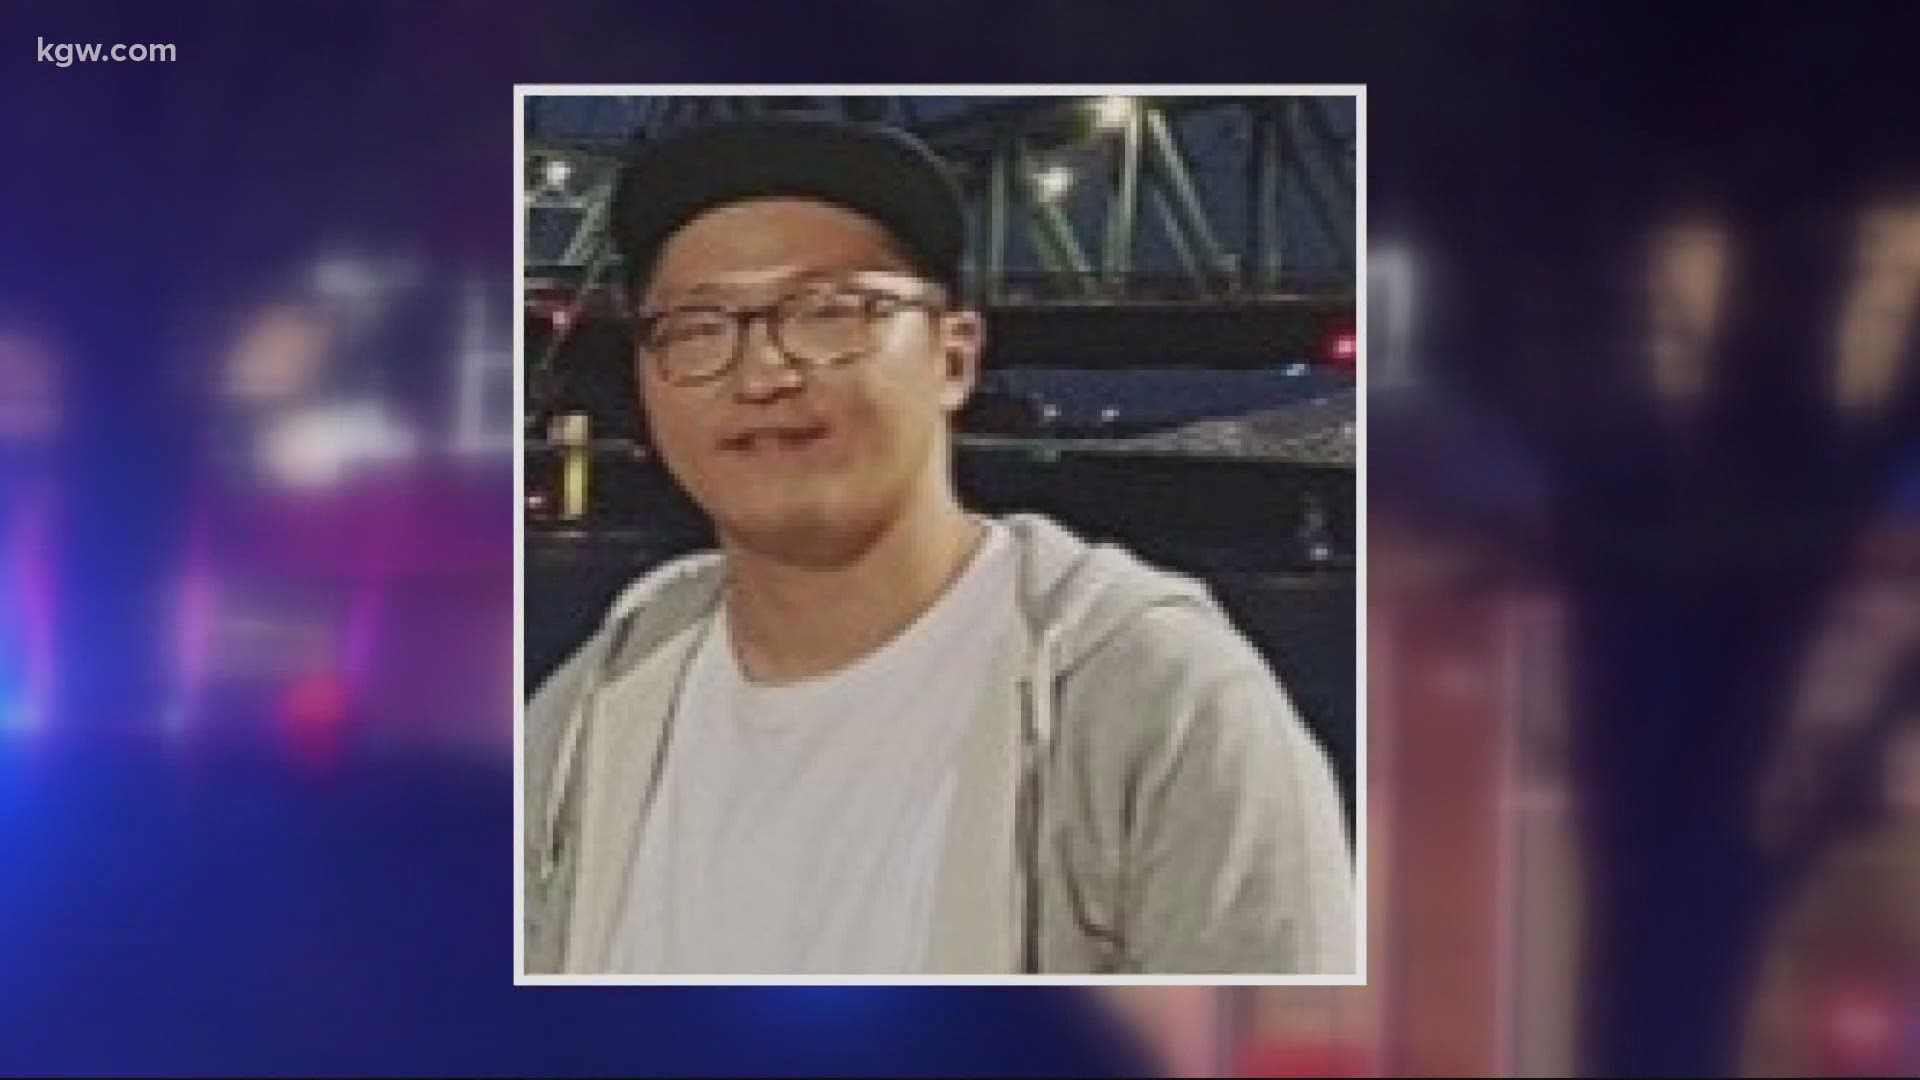 Matthew Choi was found stabbed to death in his Southeast Portland apartment building.